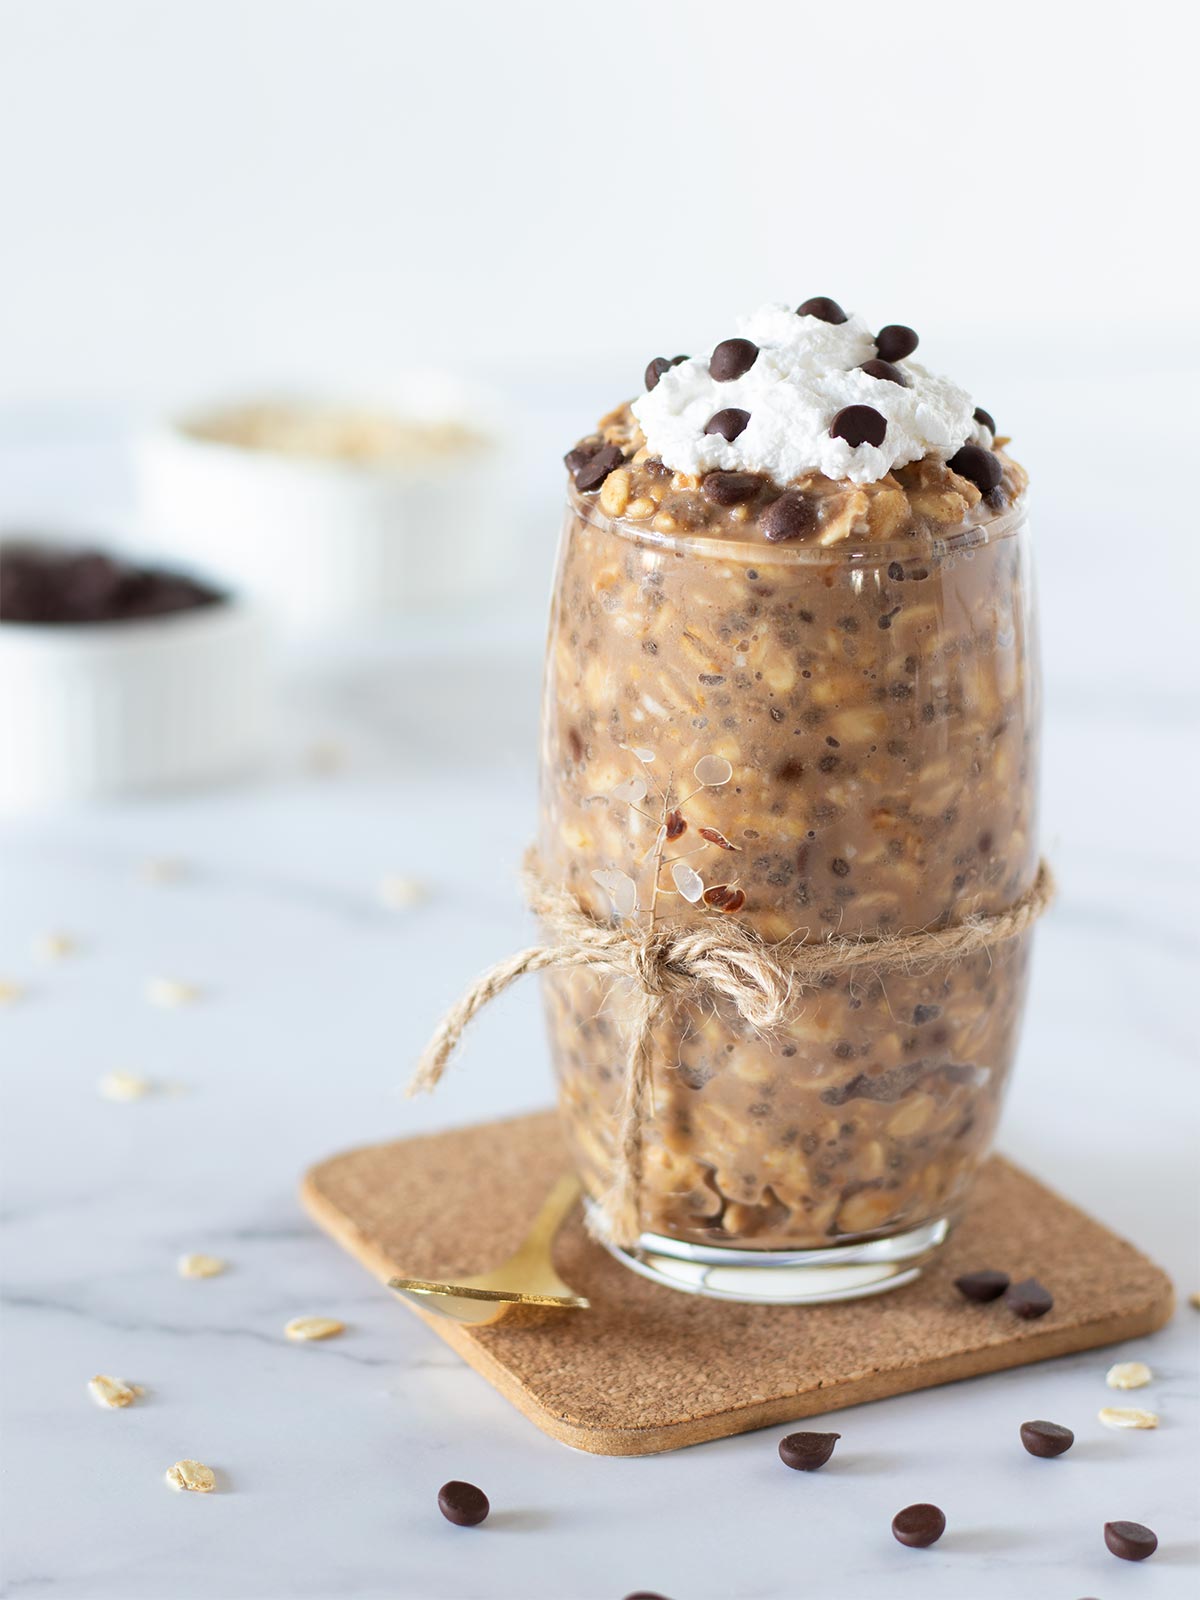 Healthy cookie dough overnight oats with peanut butter and chia seeds in a glass.